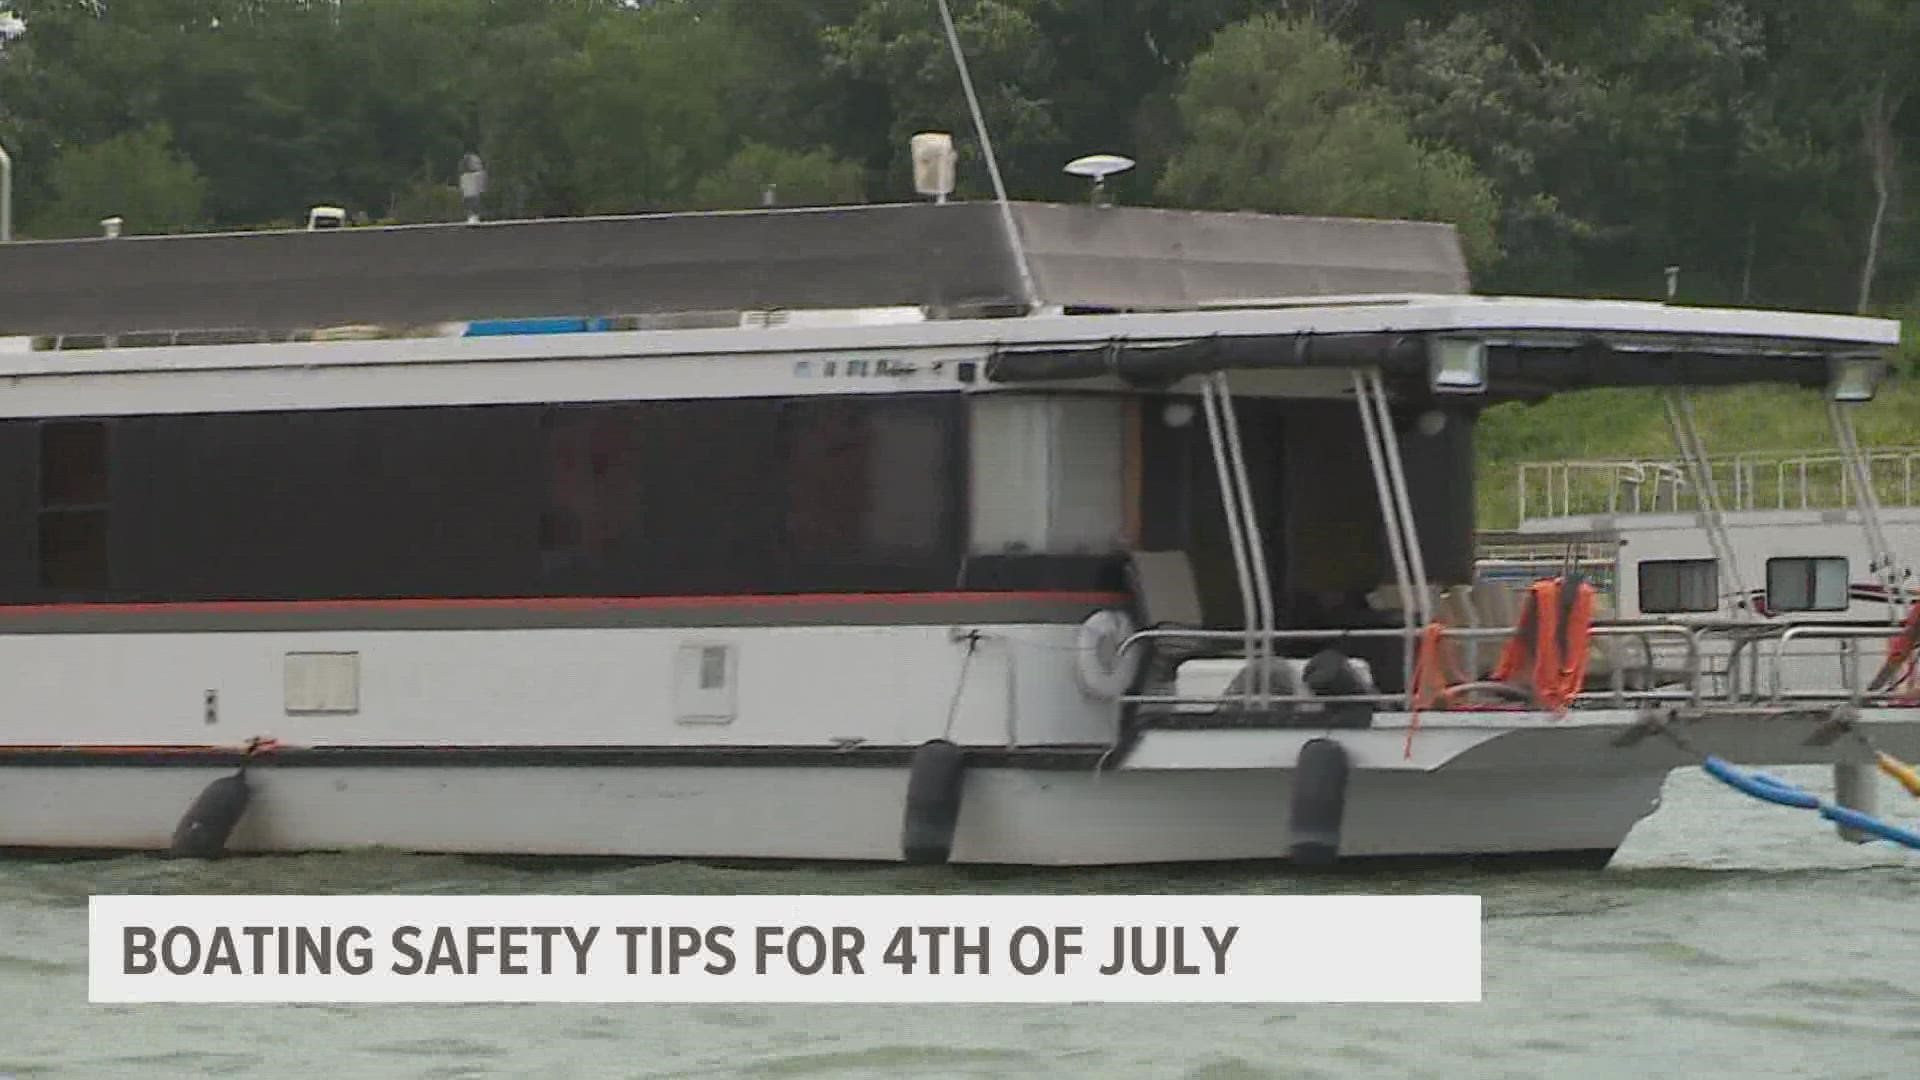 Local 5 met with local law enforcement officers to discuss how people can stay safe on the water this holiday weekend.